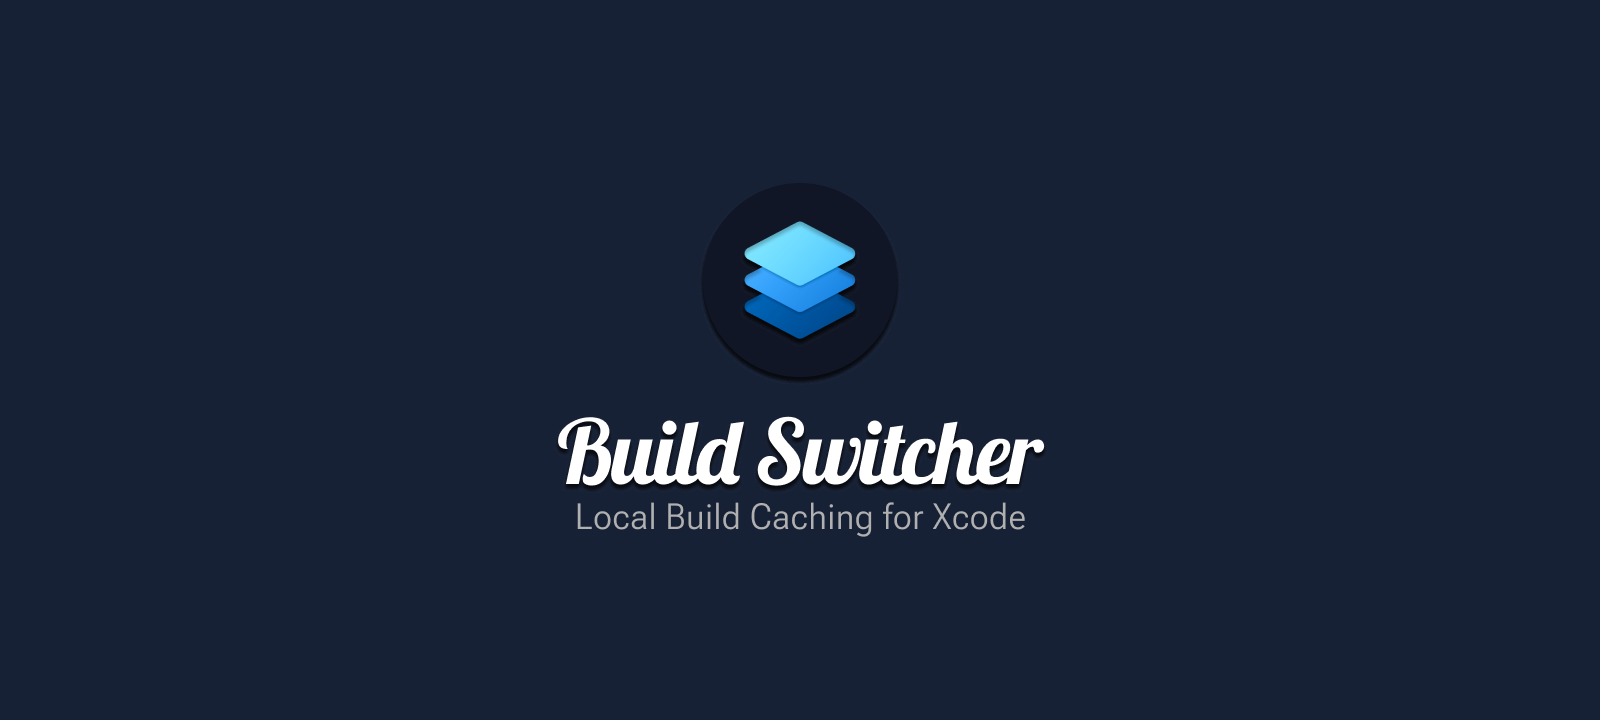 Introducing BuildSwitcher: Local Build Caching in Xcode 🚀